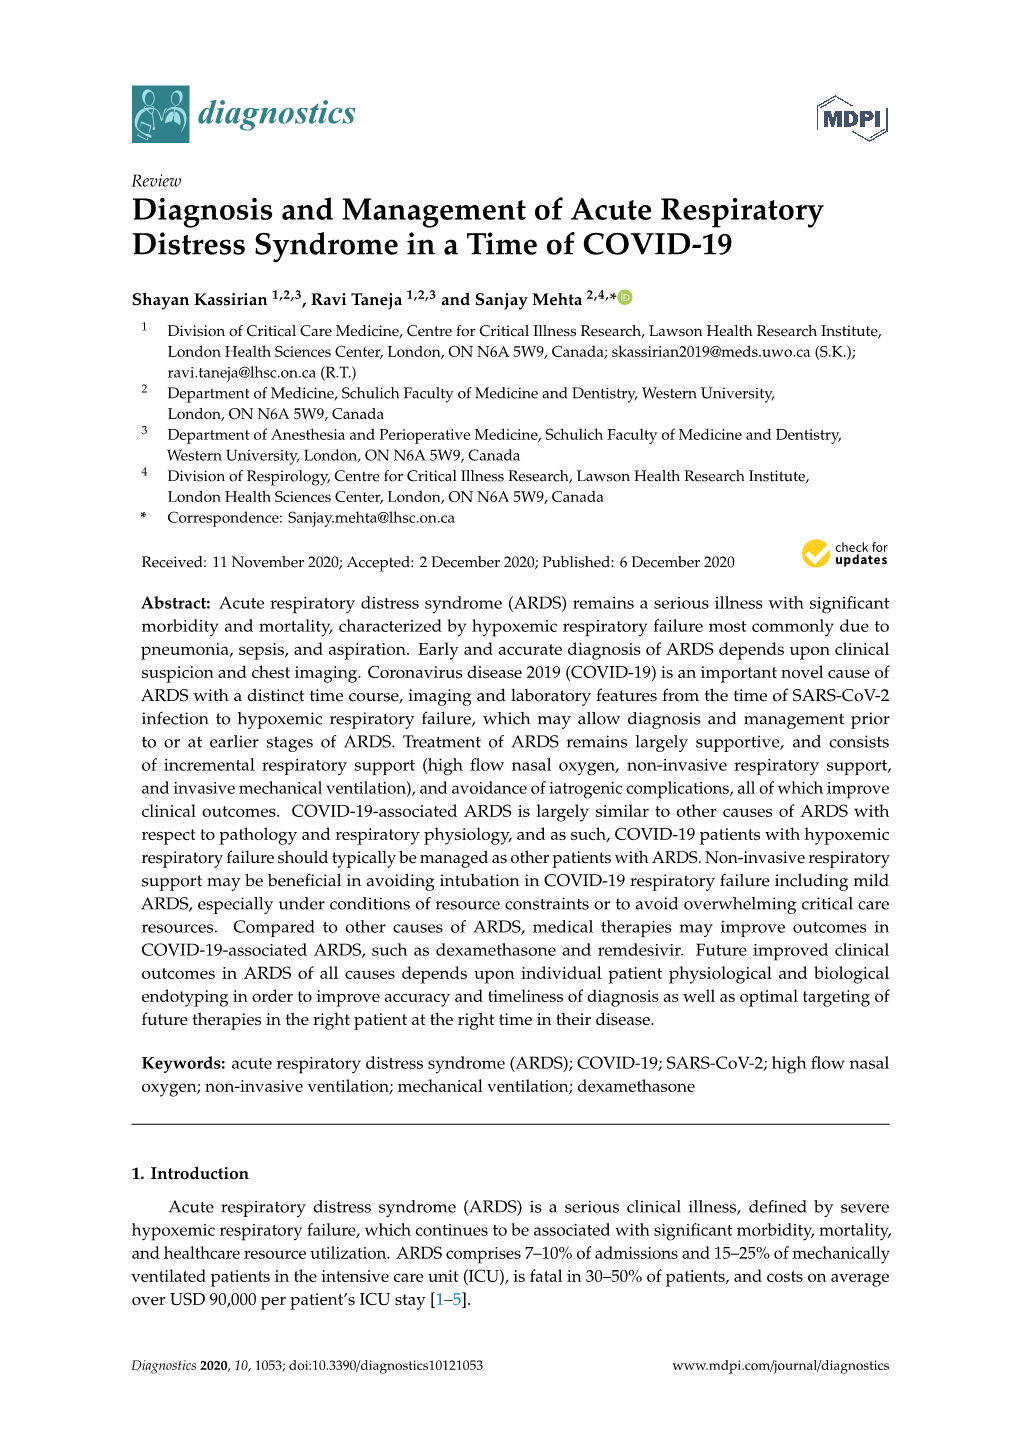 Diagnosis and Management of Acute Respiratory Distress Syndrome in a Time of COVID-19